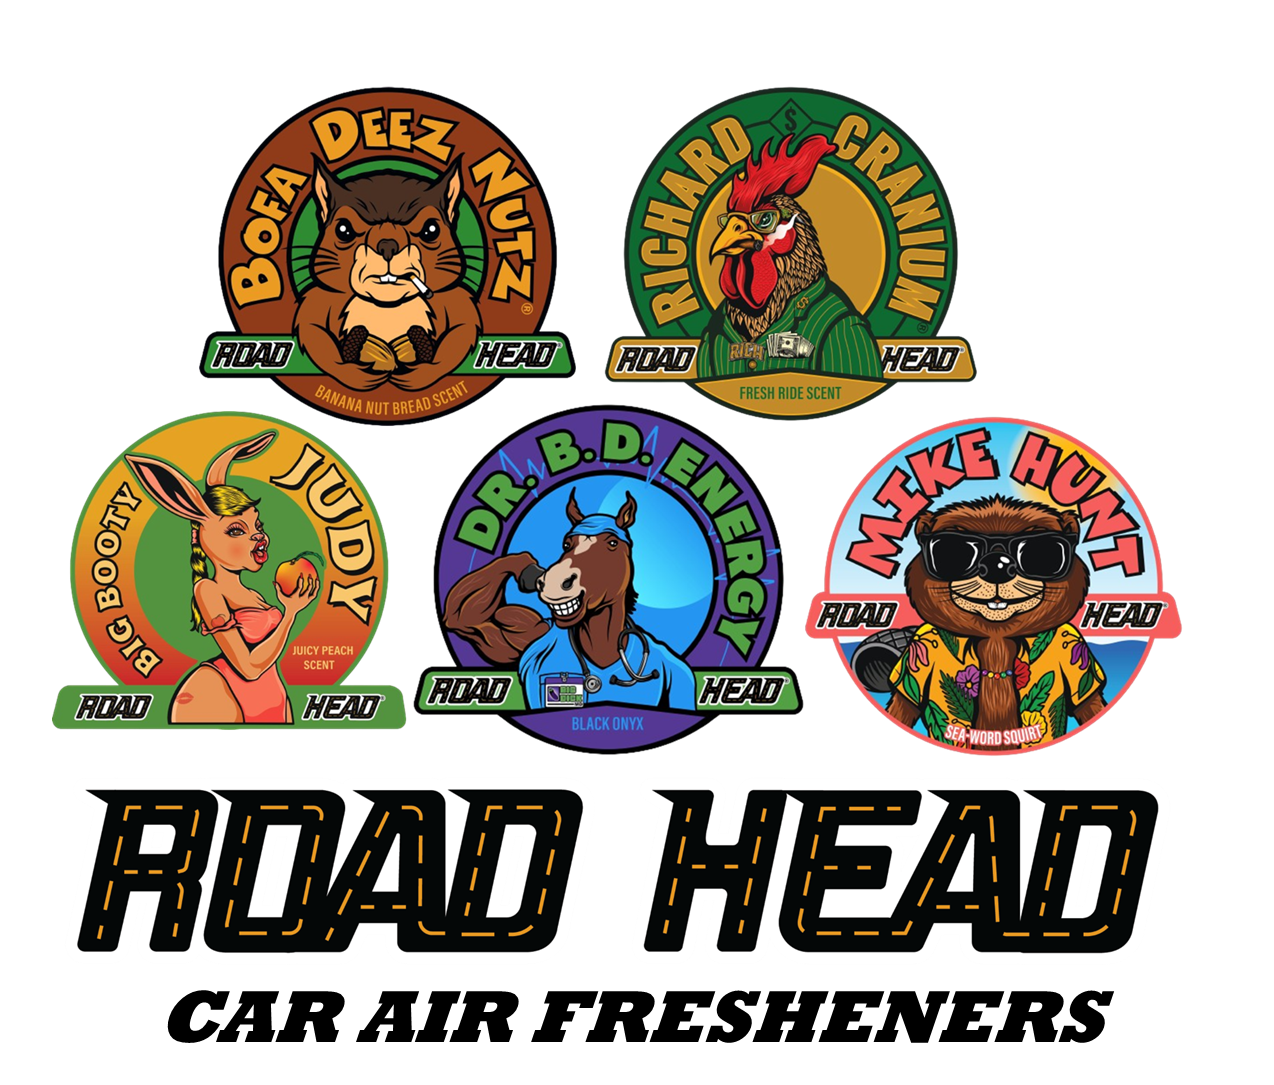 Road Head - Car Air Fresheners - Collect All 5 "Heads" - Hang Easily from Rearview Mirror